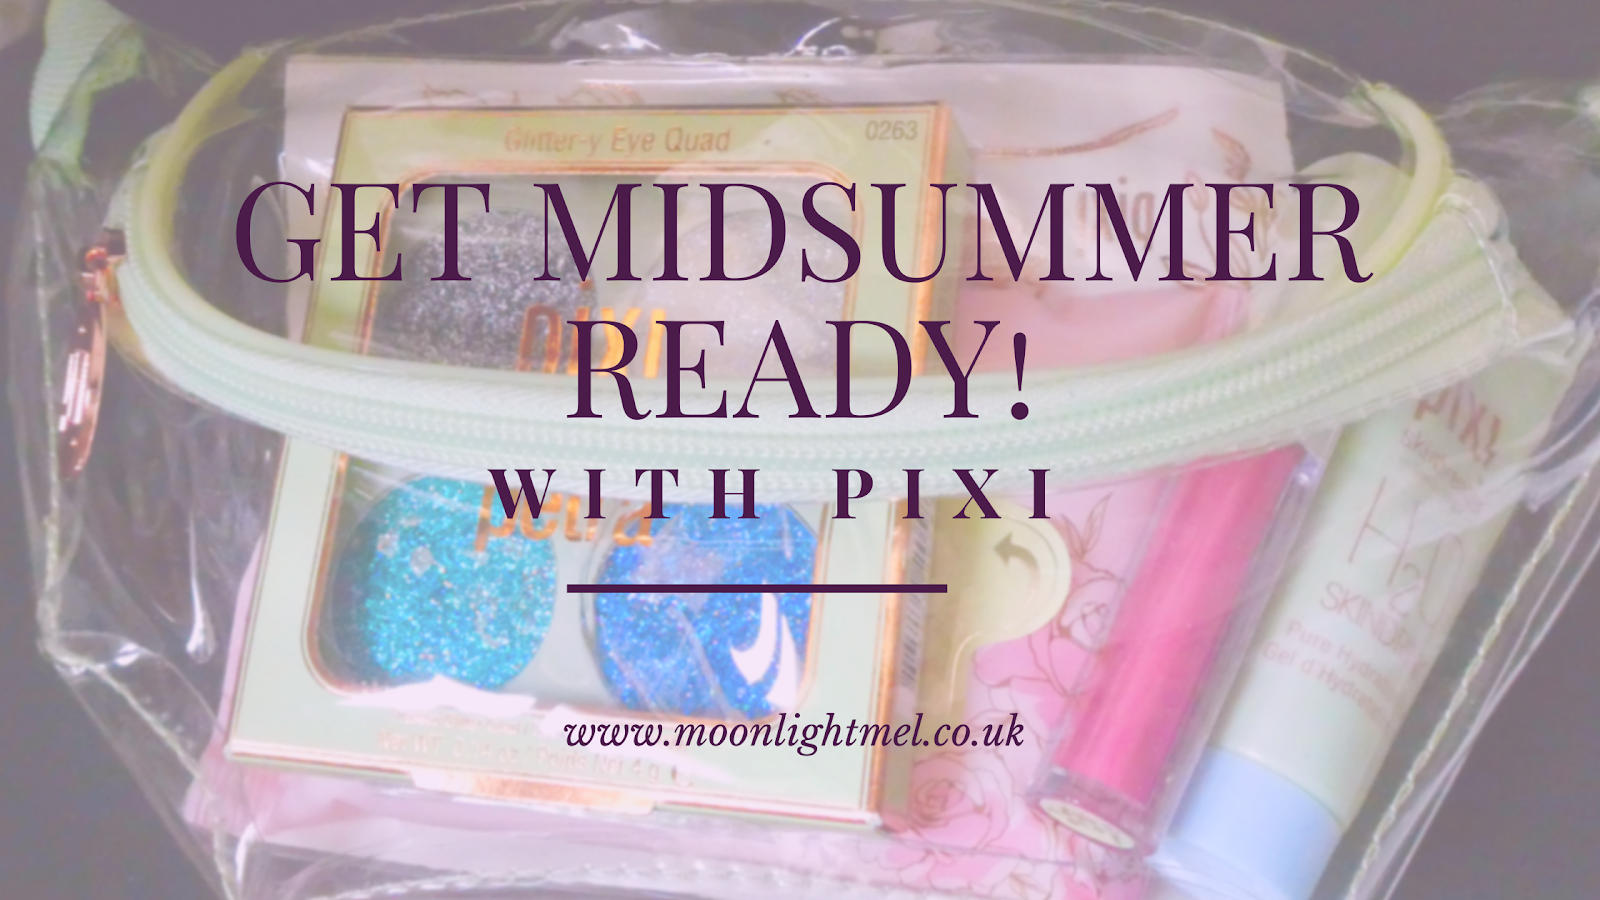 Get Midsummer Ready with Pixi 